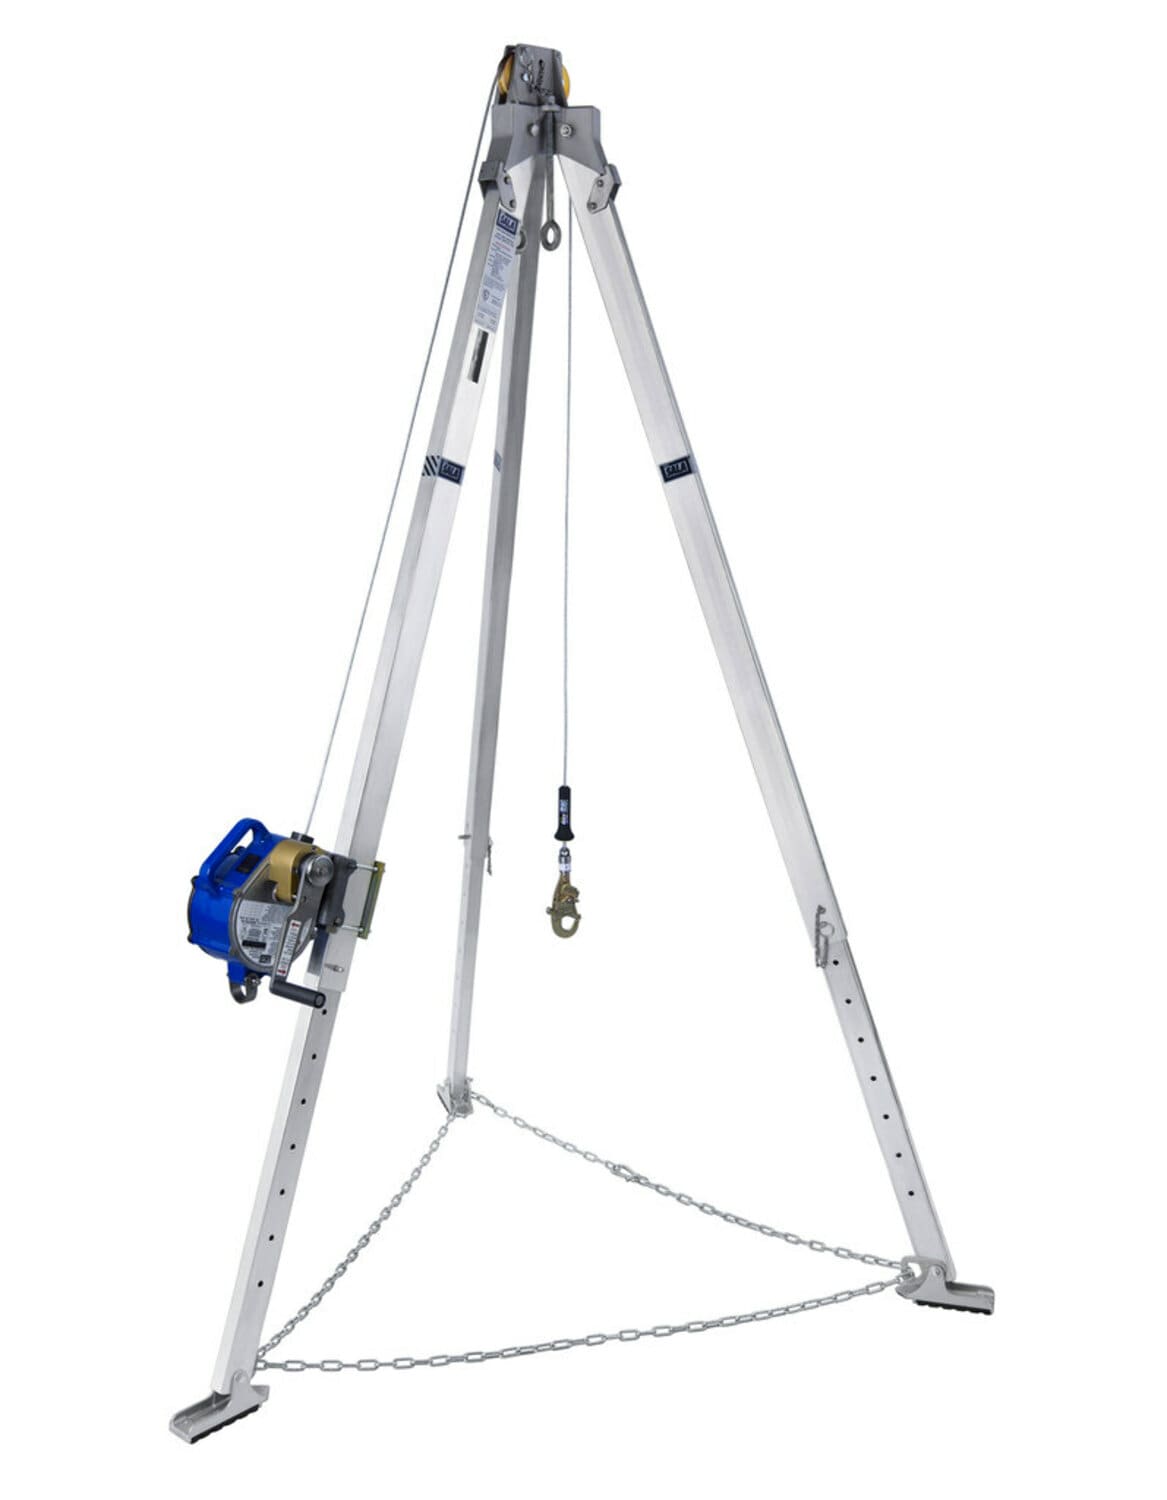 7010616057 - 3M DBI-SALA Confined Space Aluminum Tripod with 3-Way SRL 8301030, 7 ft High, 50 ft Galvanized Cable